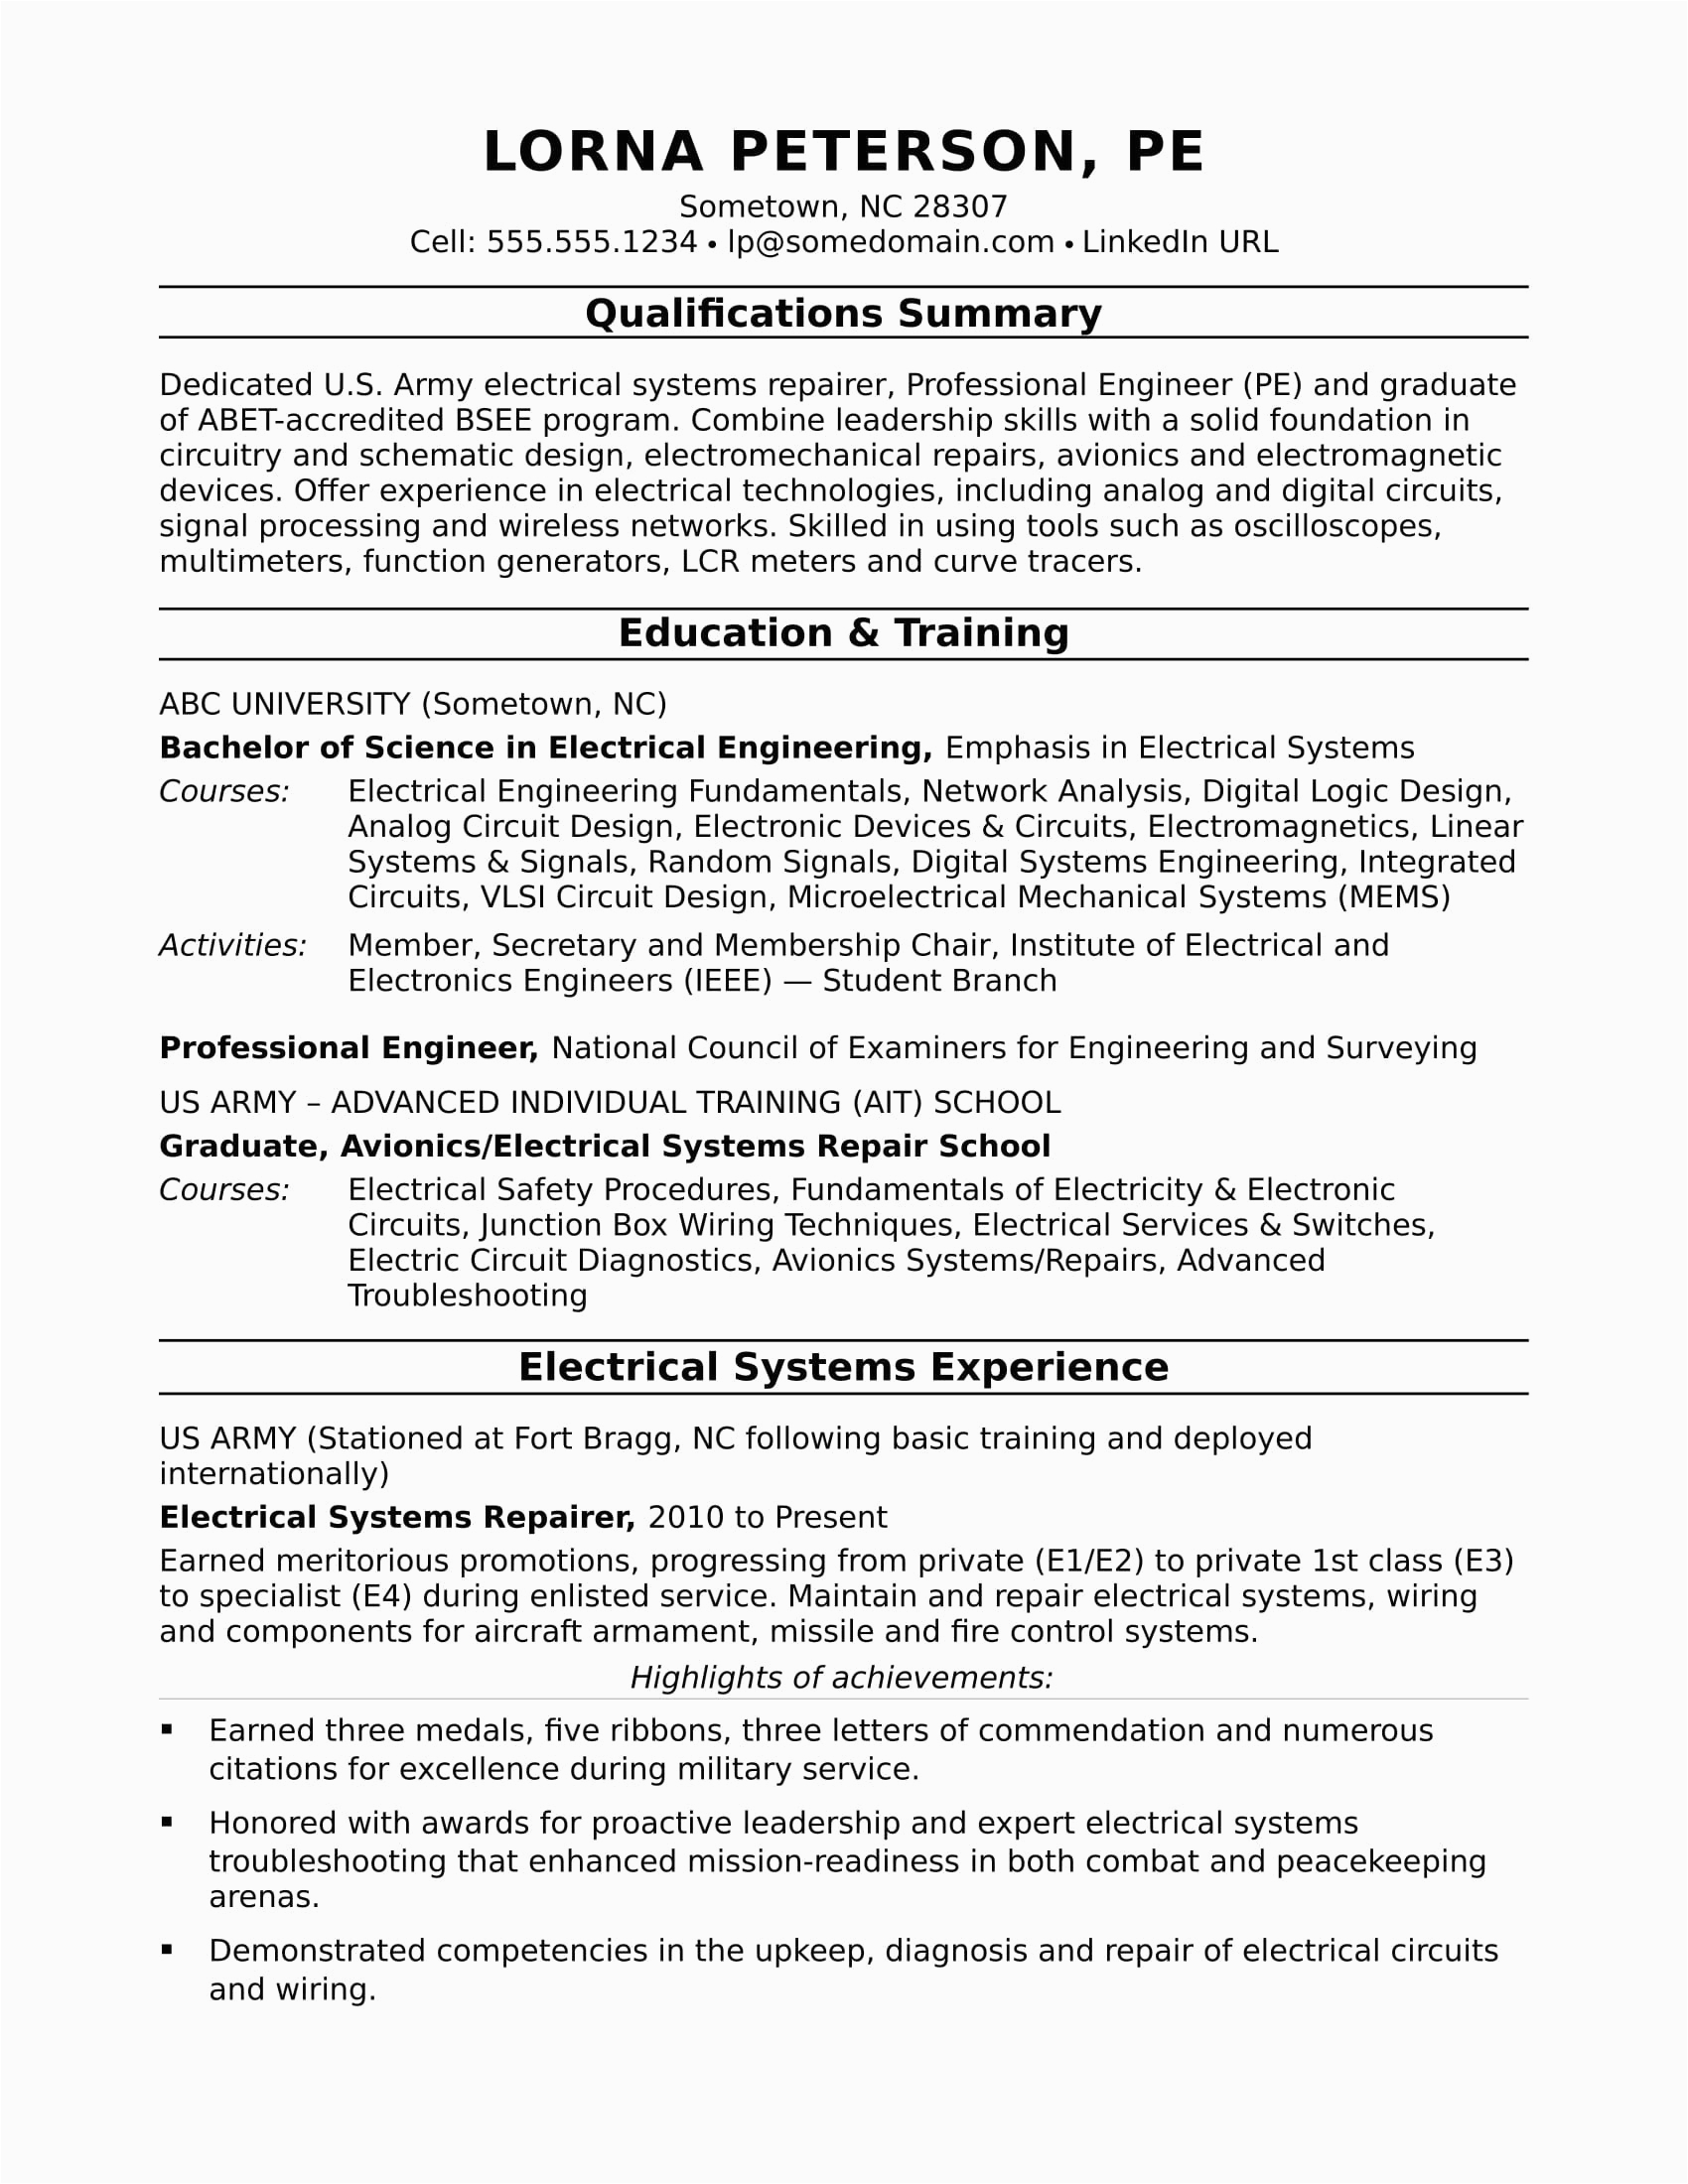 Free Resume Templates for Electrical Engineers Sample Electrical Engineering Resume